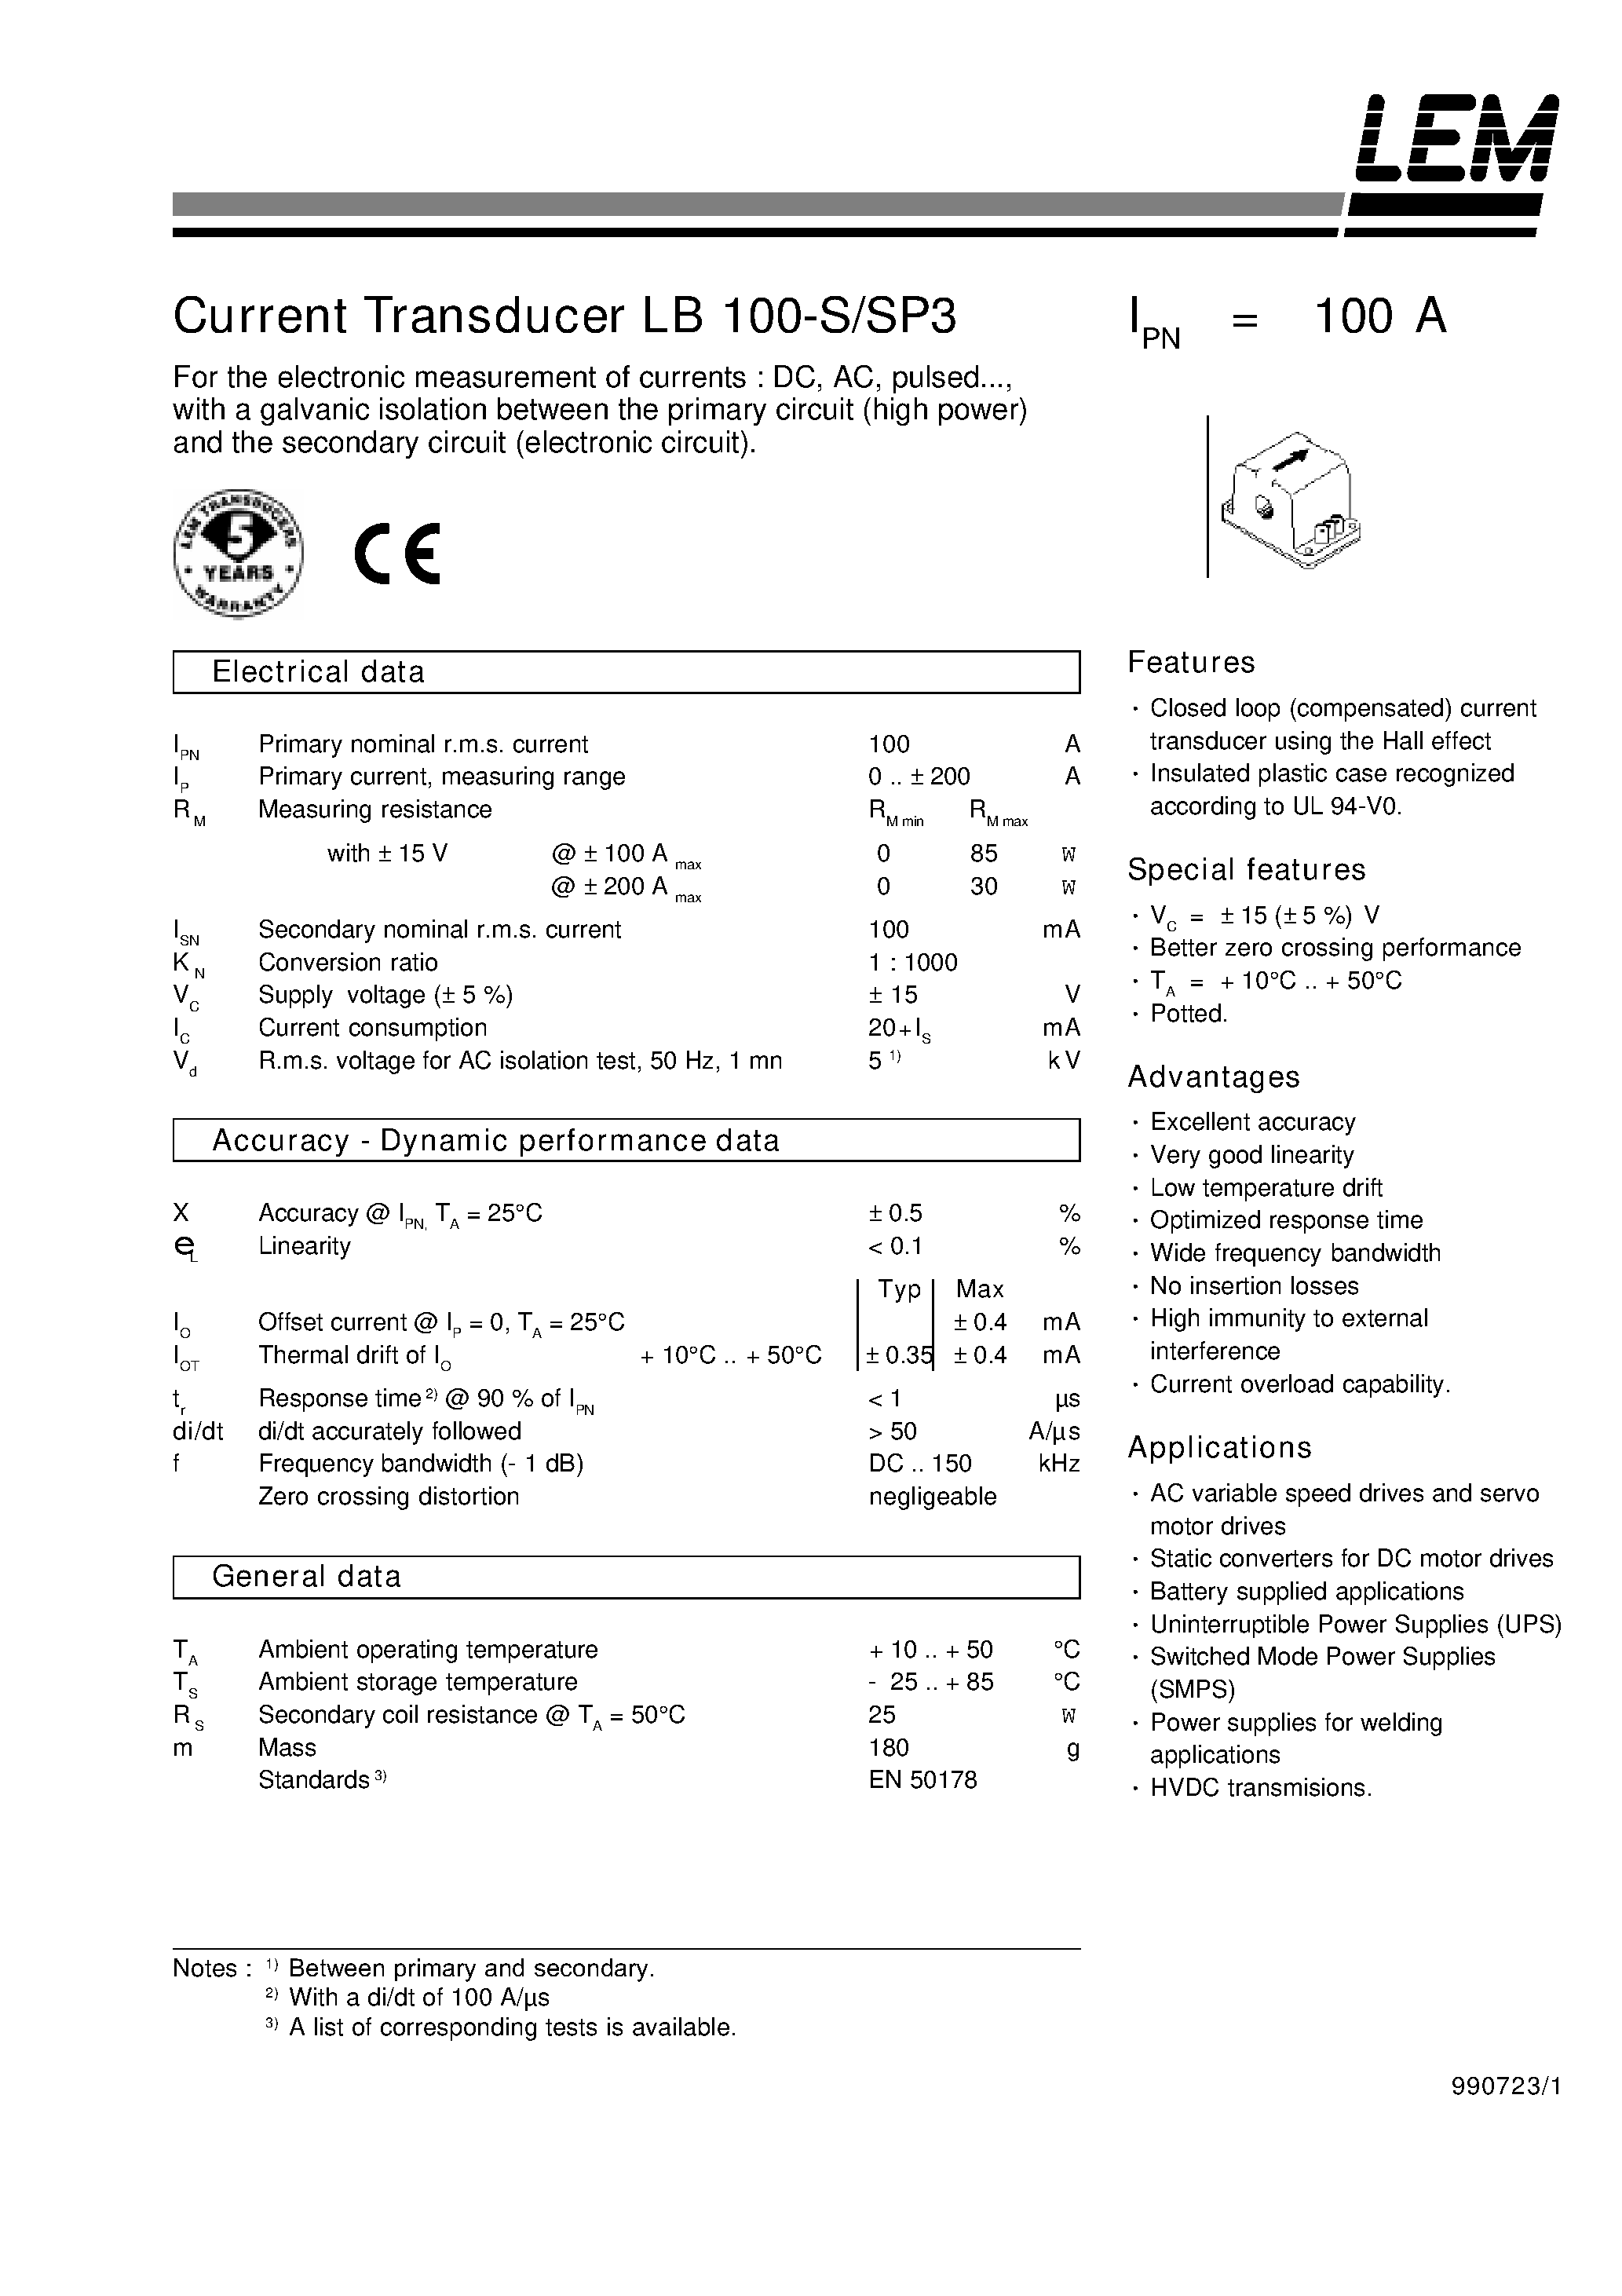 Datasheet LB100-S - Current Transducer LB 100-S/SP3 page 1